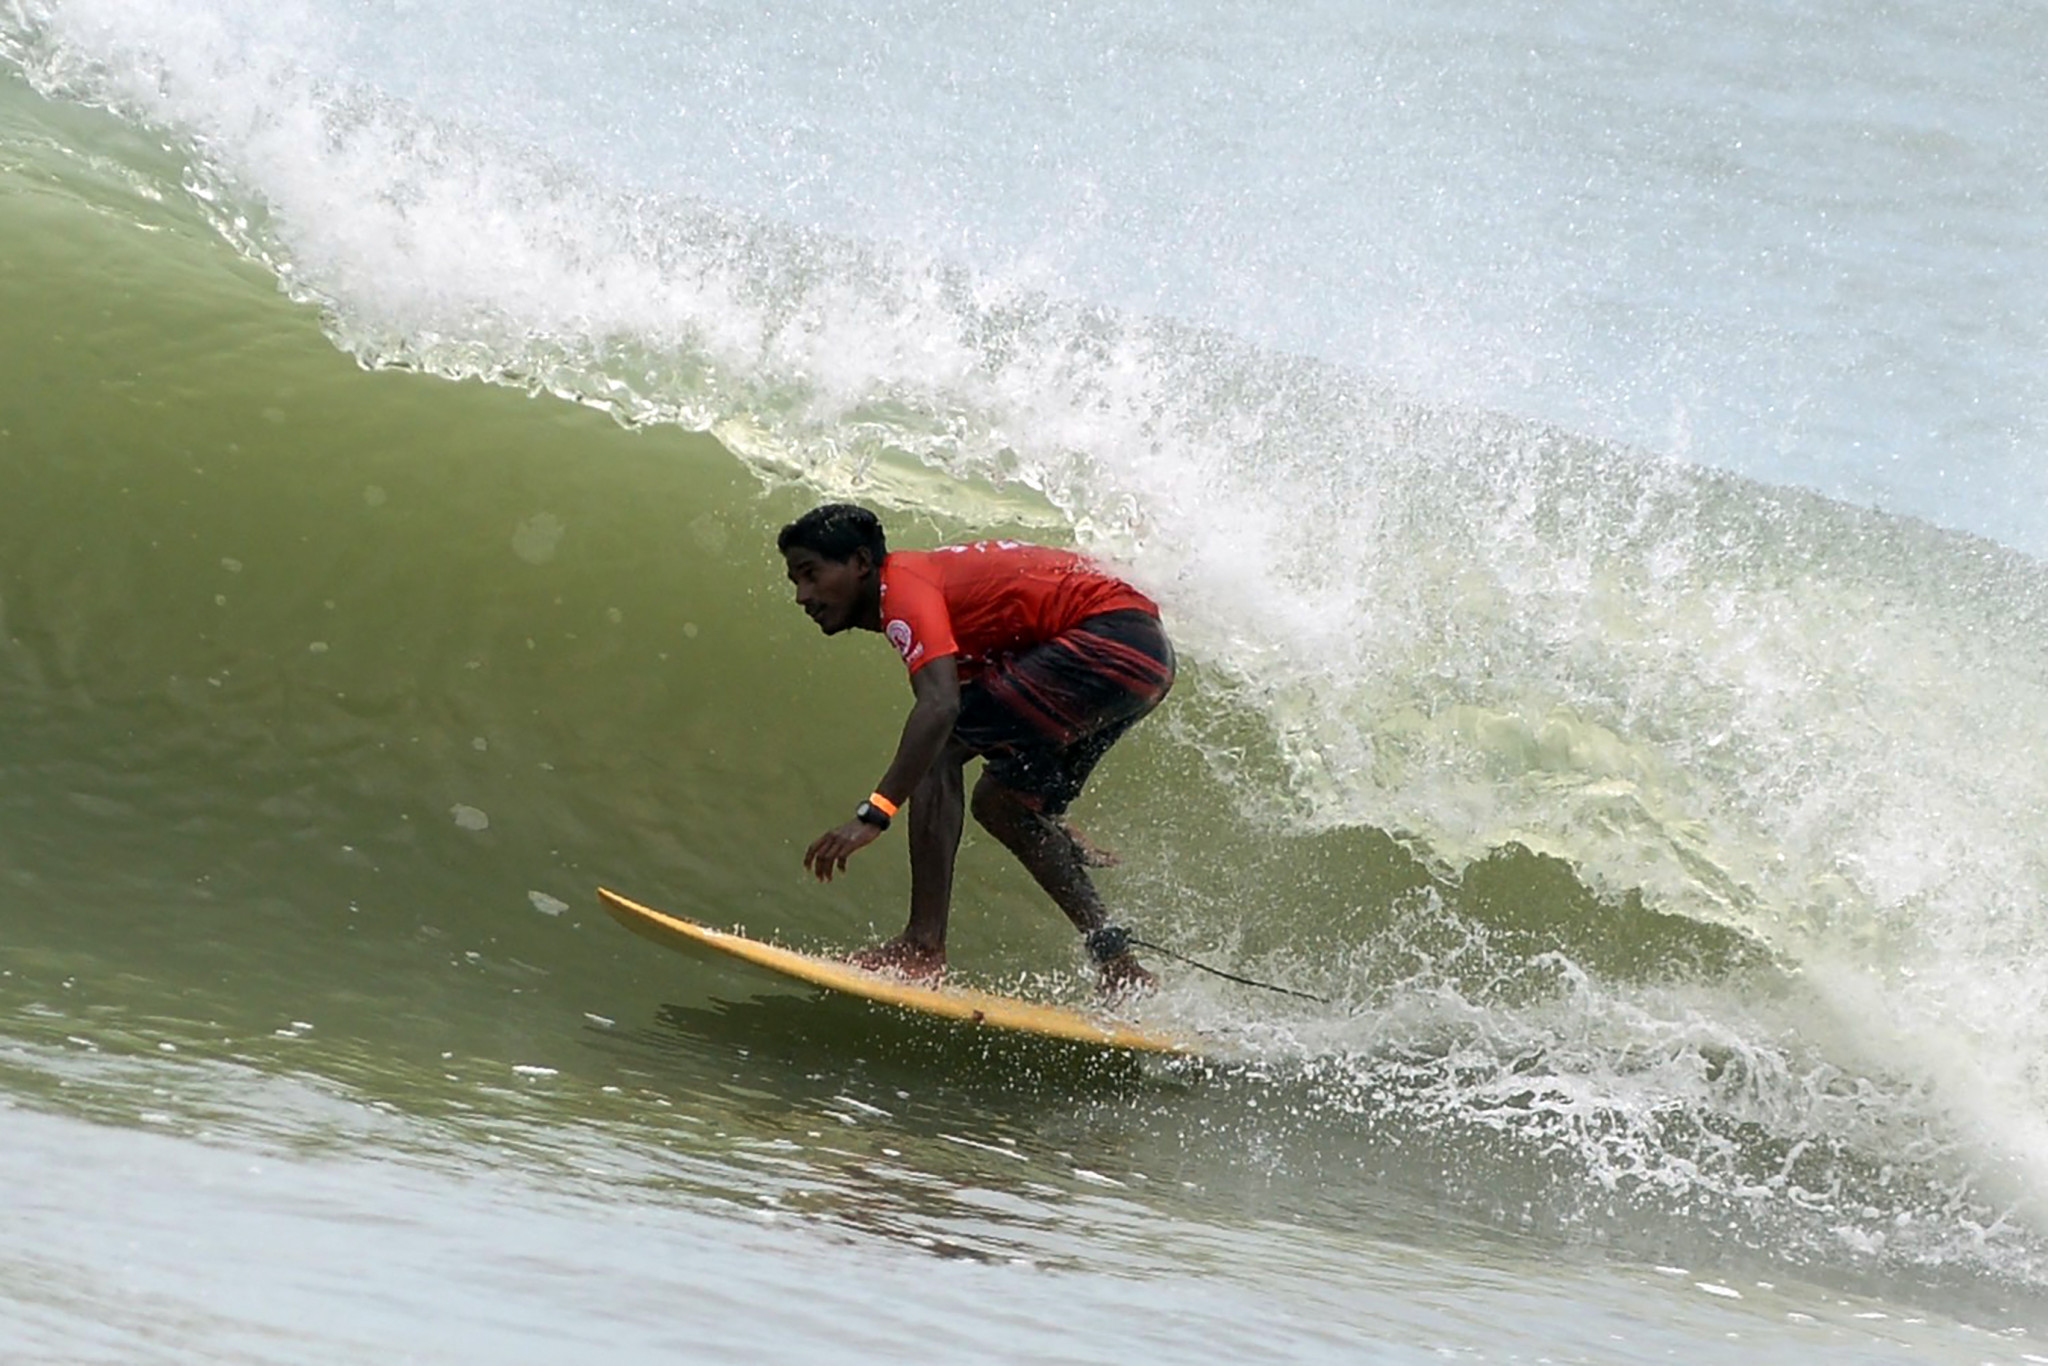 India are set to represented by four athletes at the World Surfing Games ©Getty Images